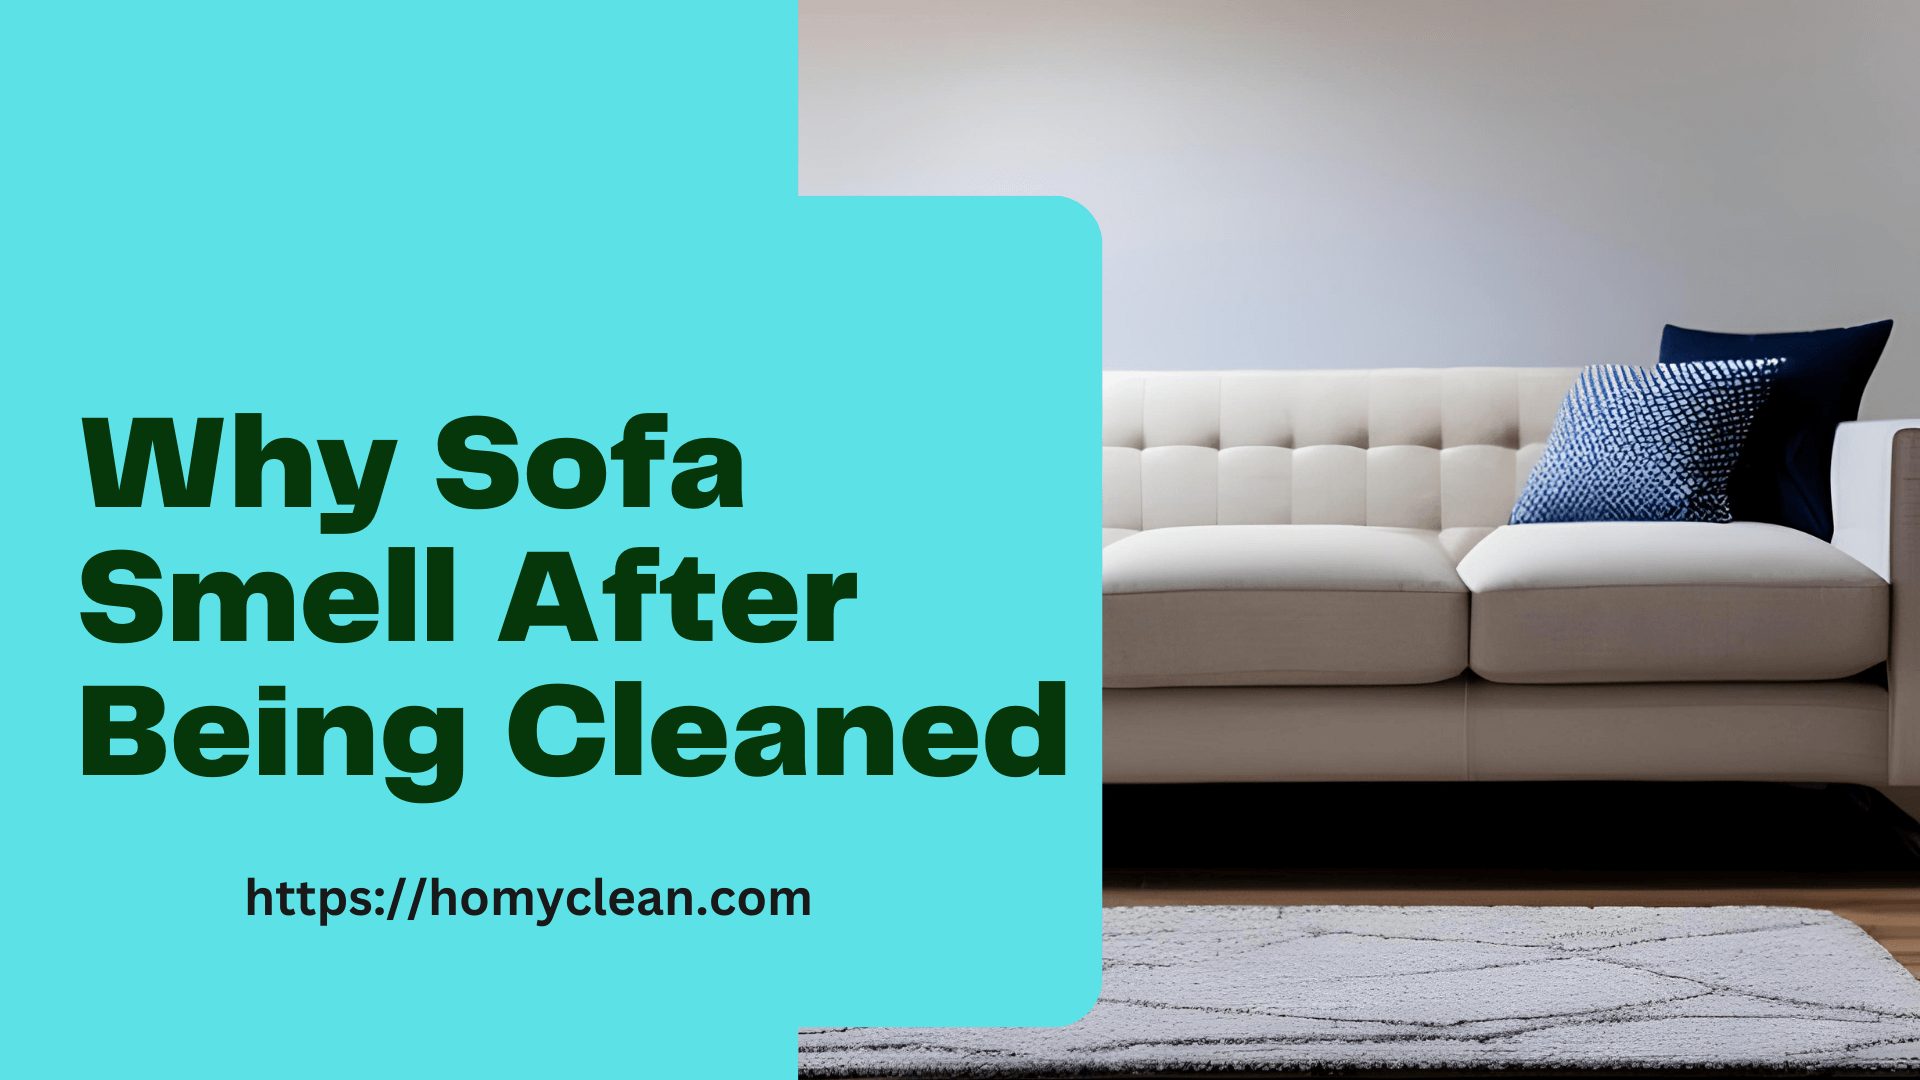 Why Does a Sofa Smell After Being Cleaned